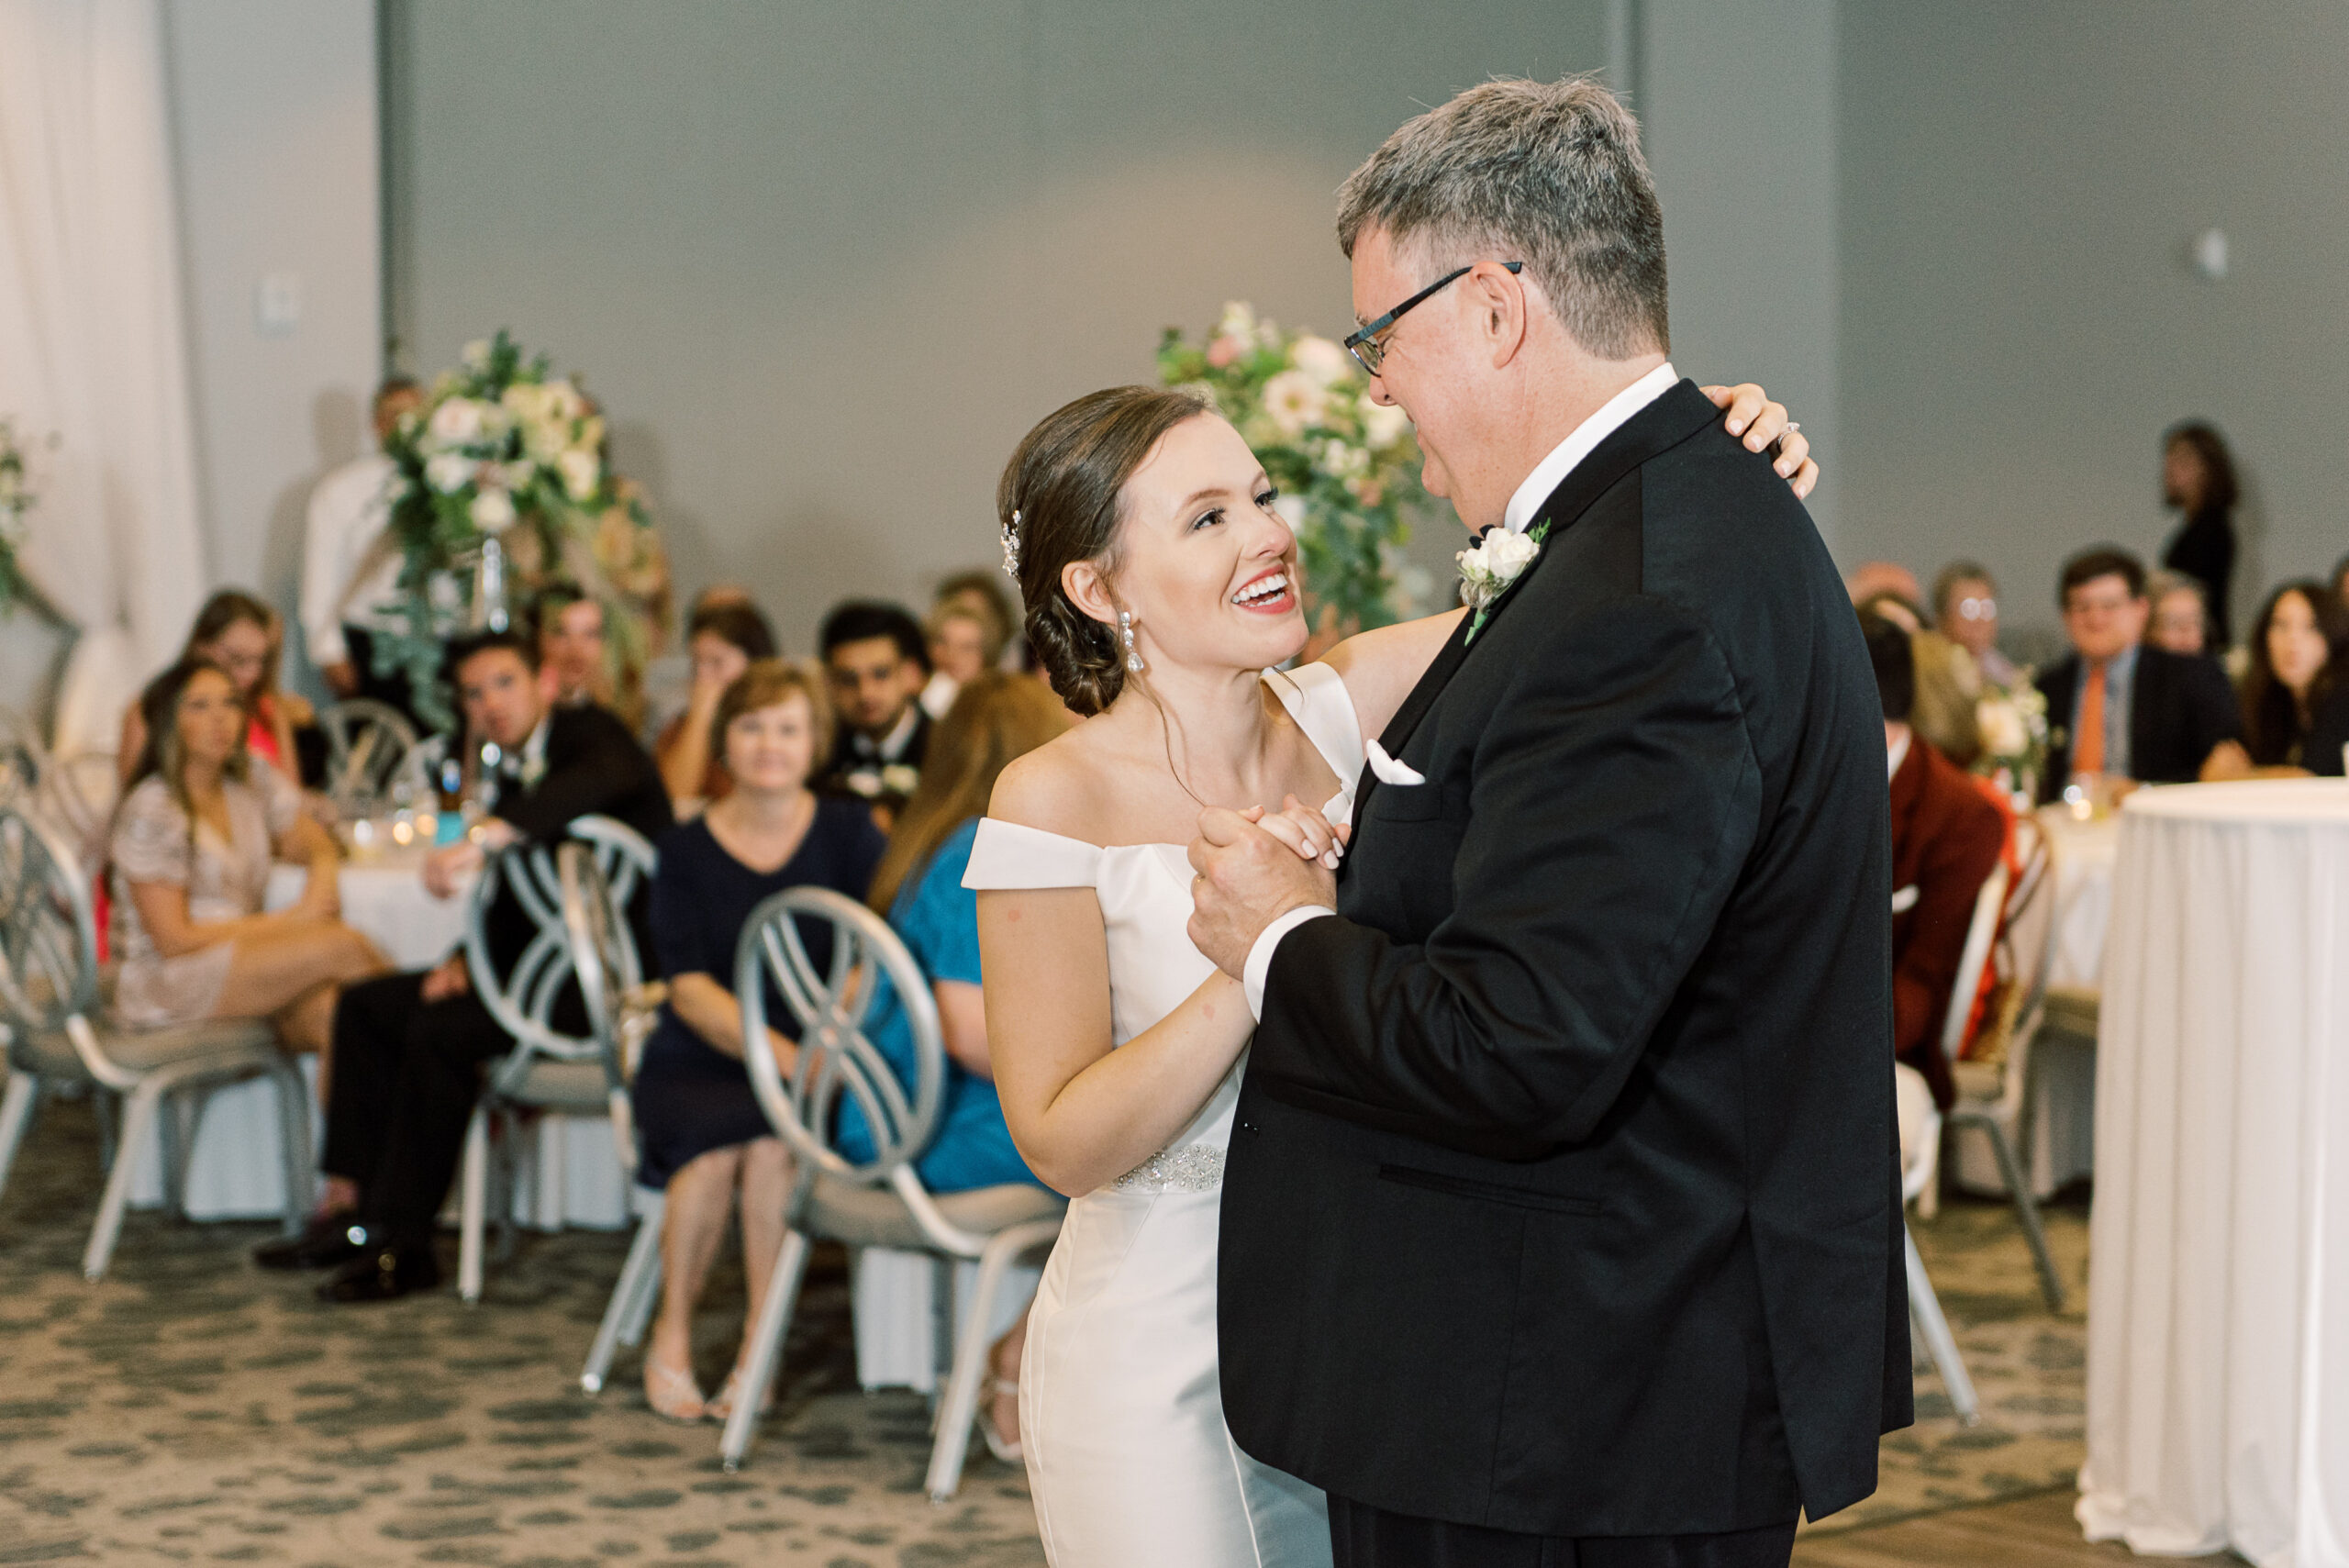 Father's Day gift guide. A father and daughter dance at her wedding reception.